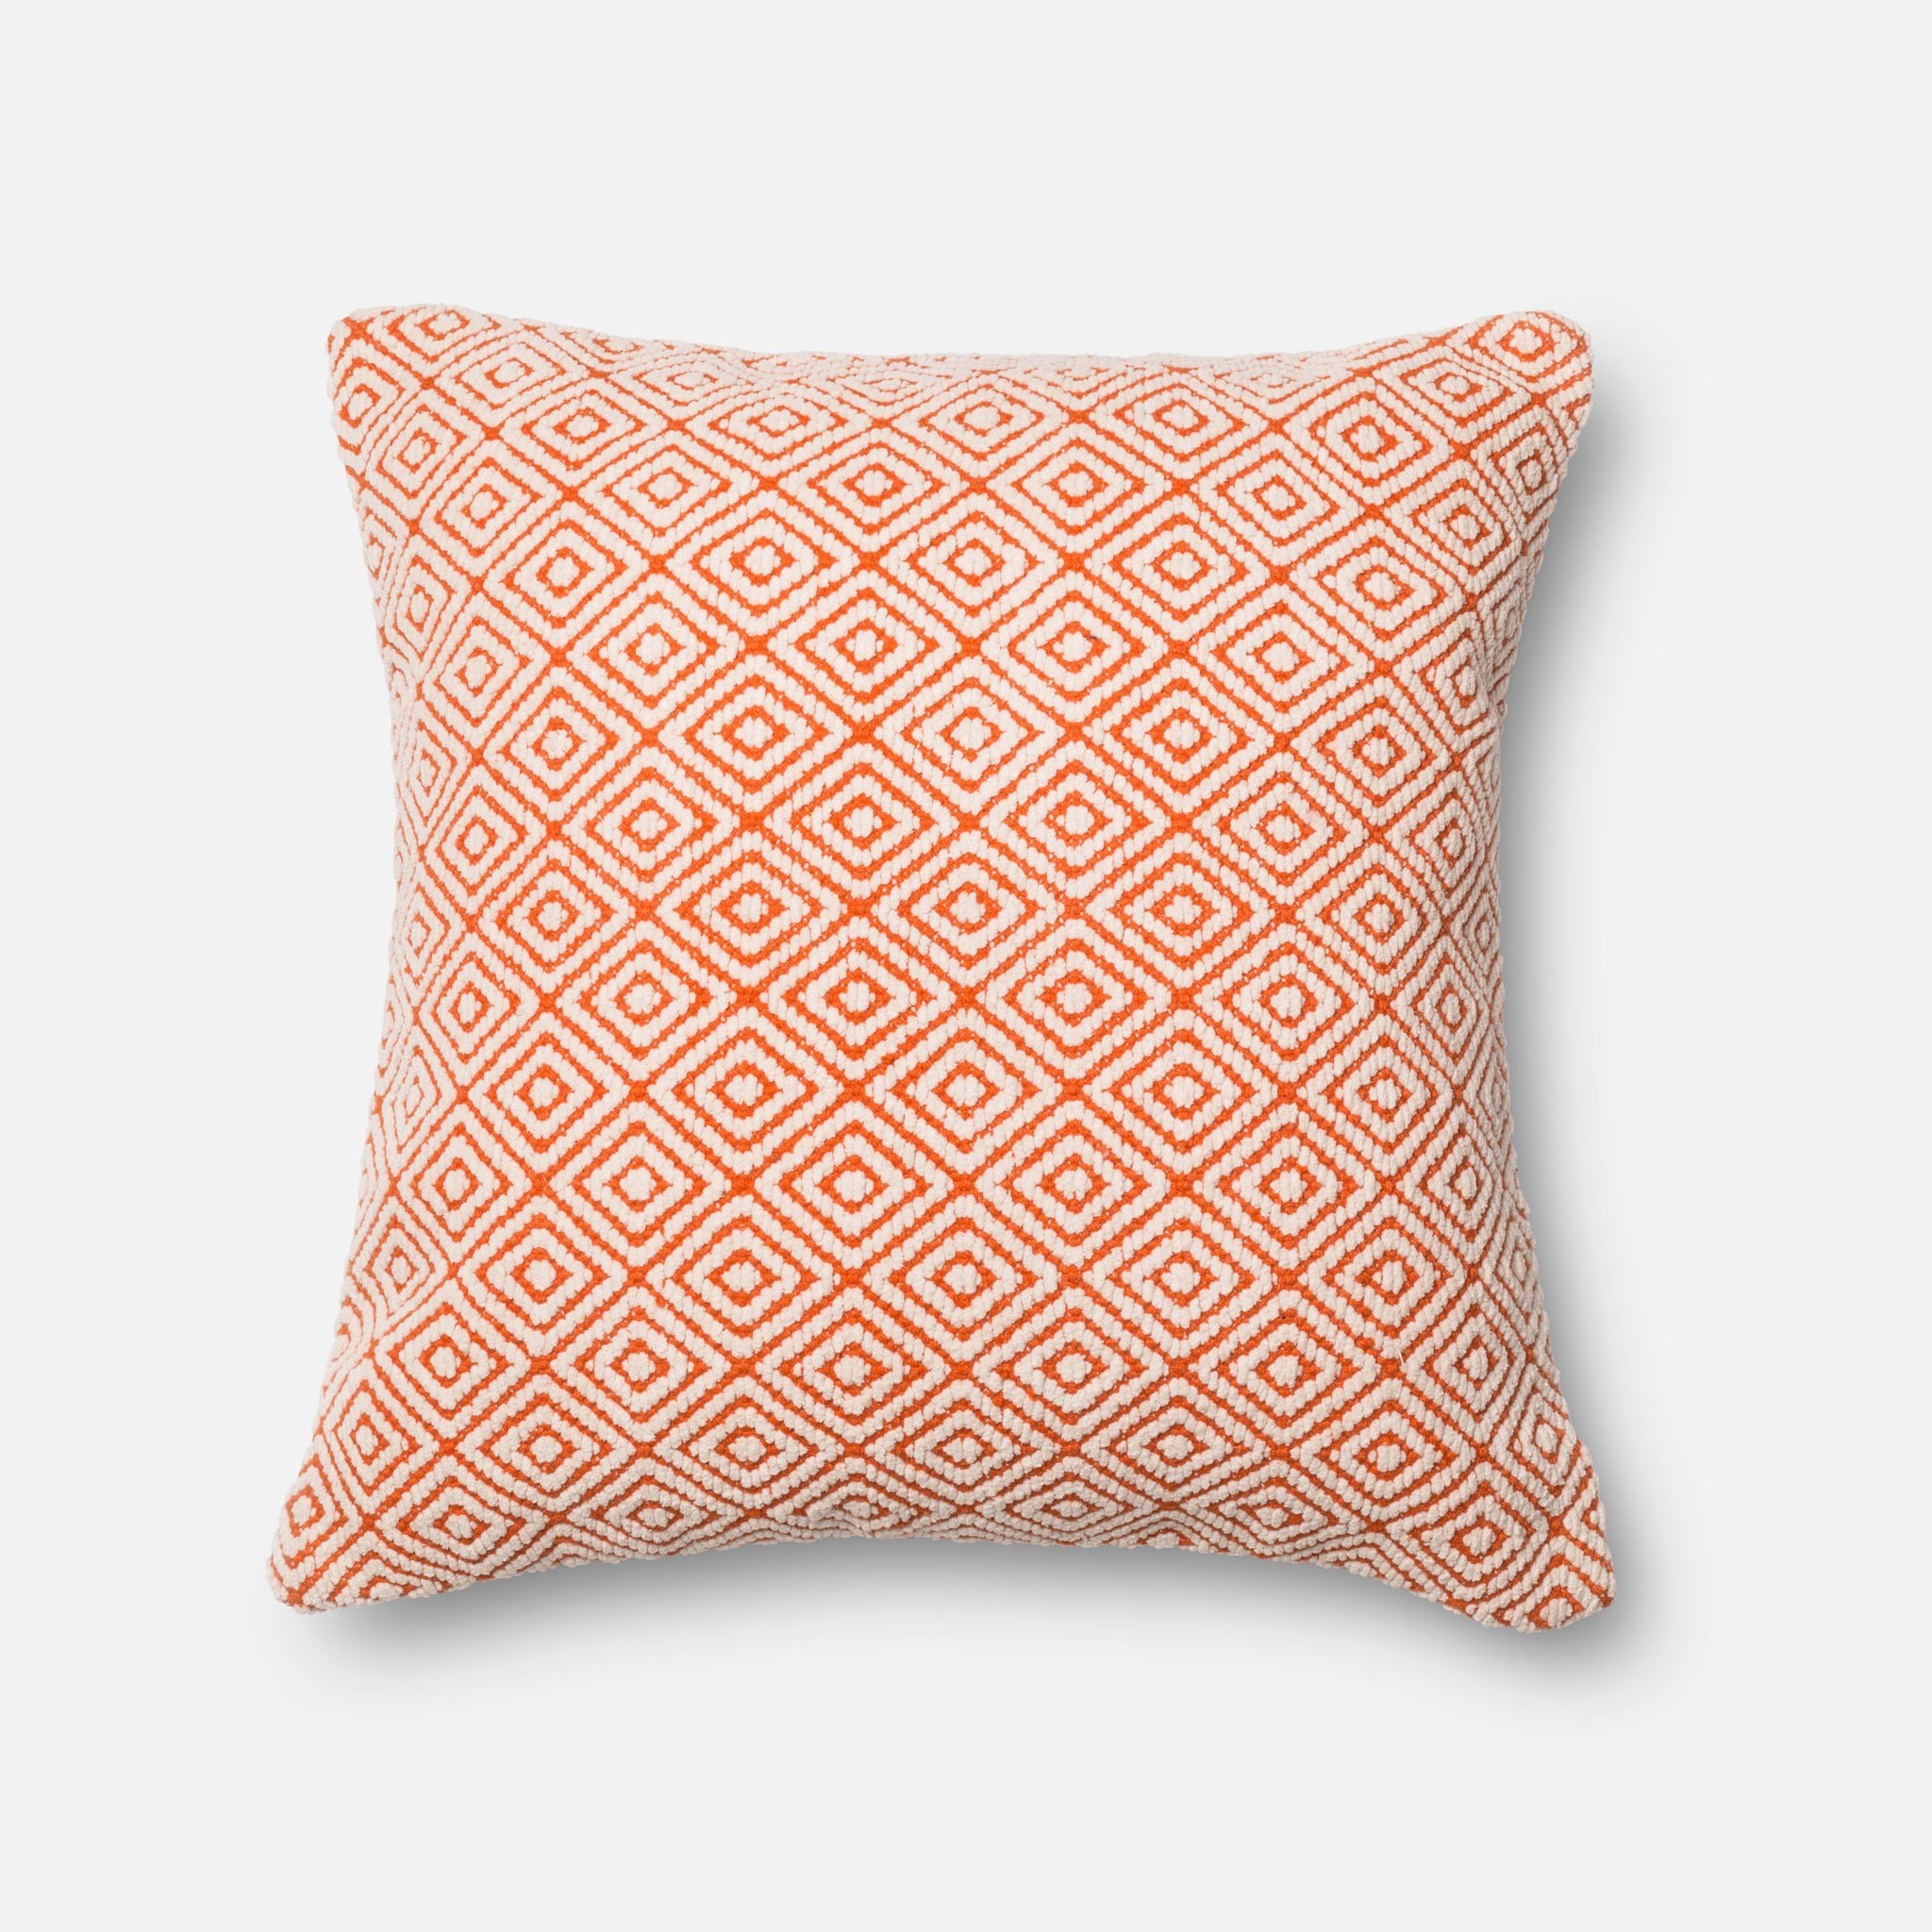 PILLOWS - ORANGE / IVORY - 22" X 22" Cover w/Down - Image 0